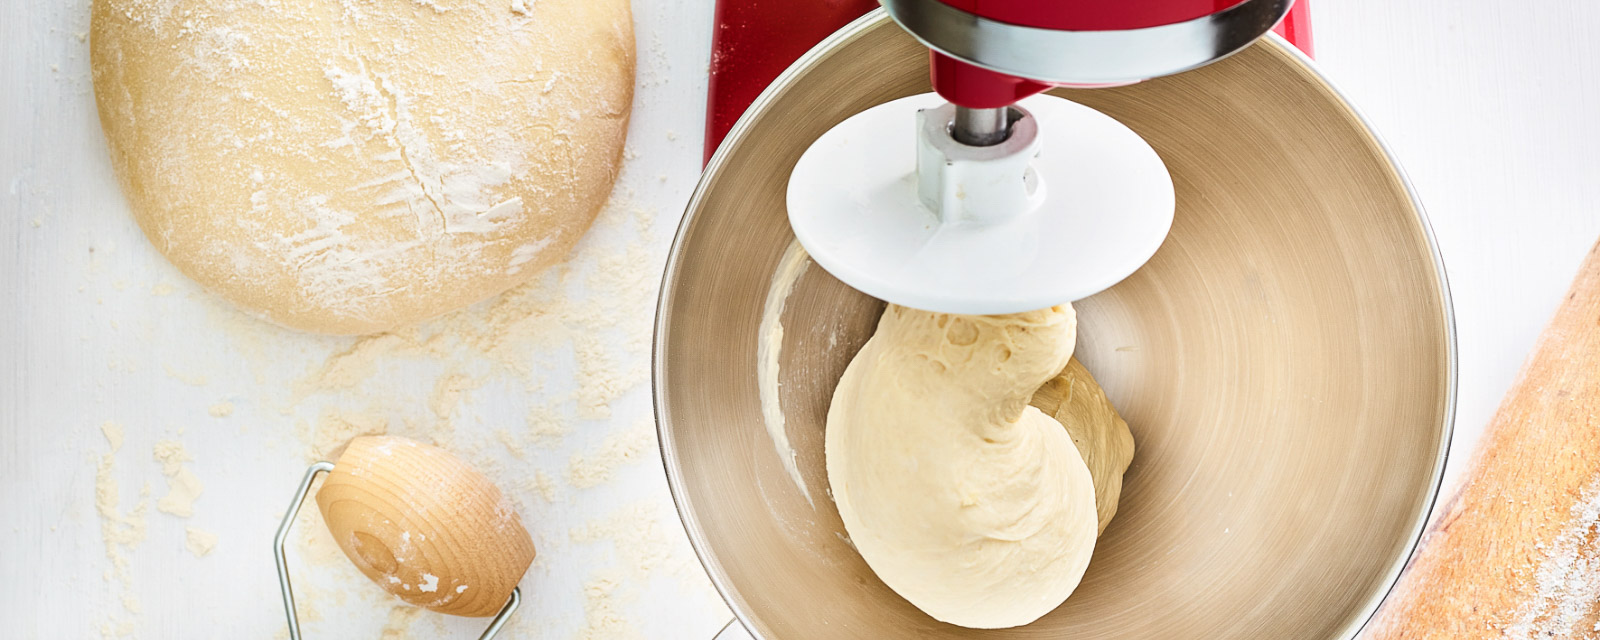 red-mixer-kneading-dough-to-make-yeast-bread